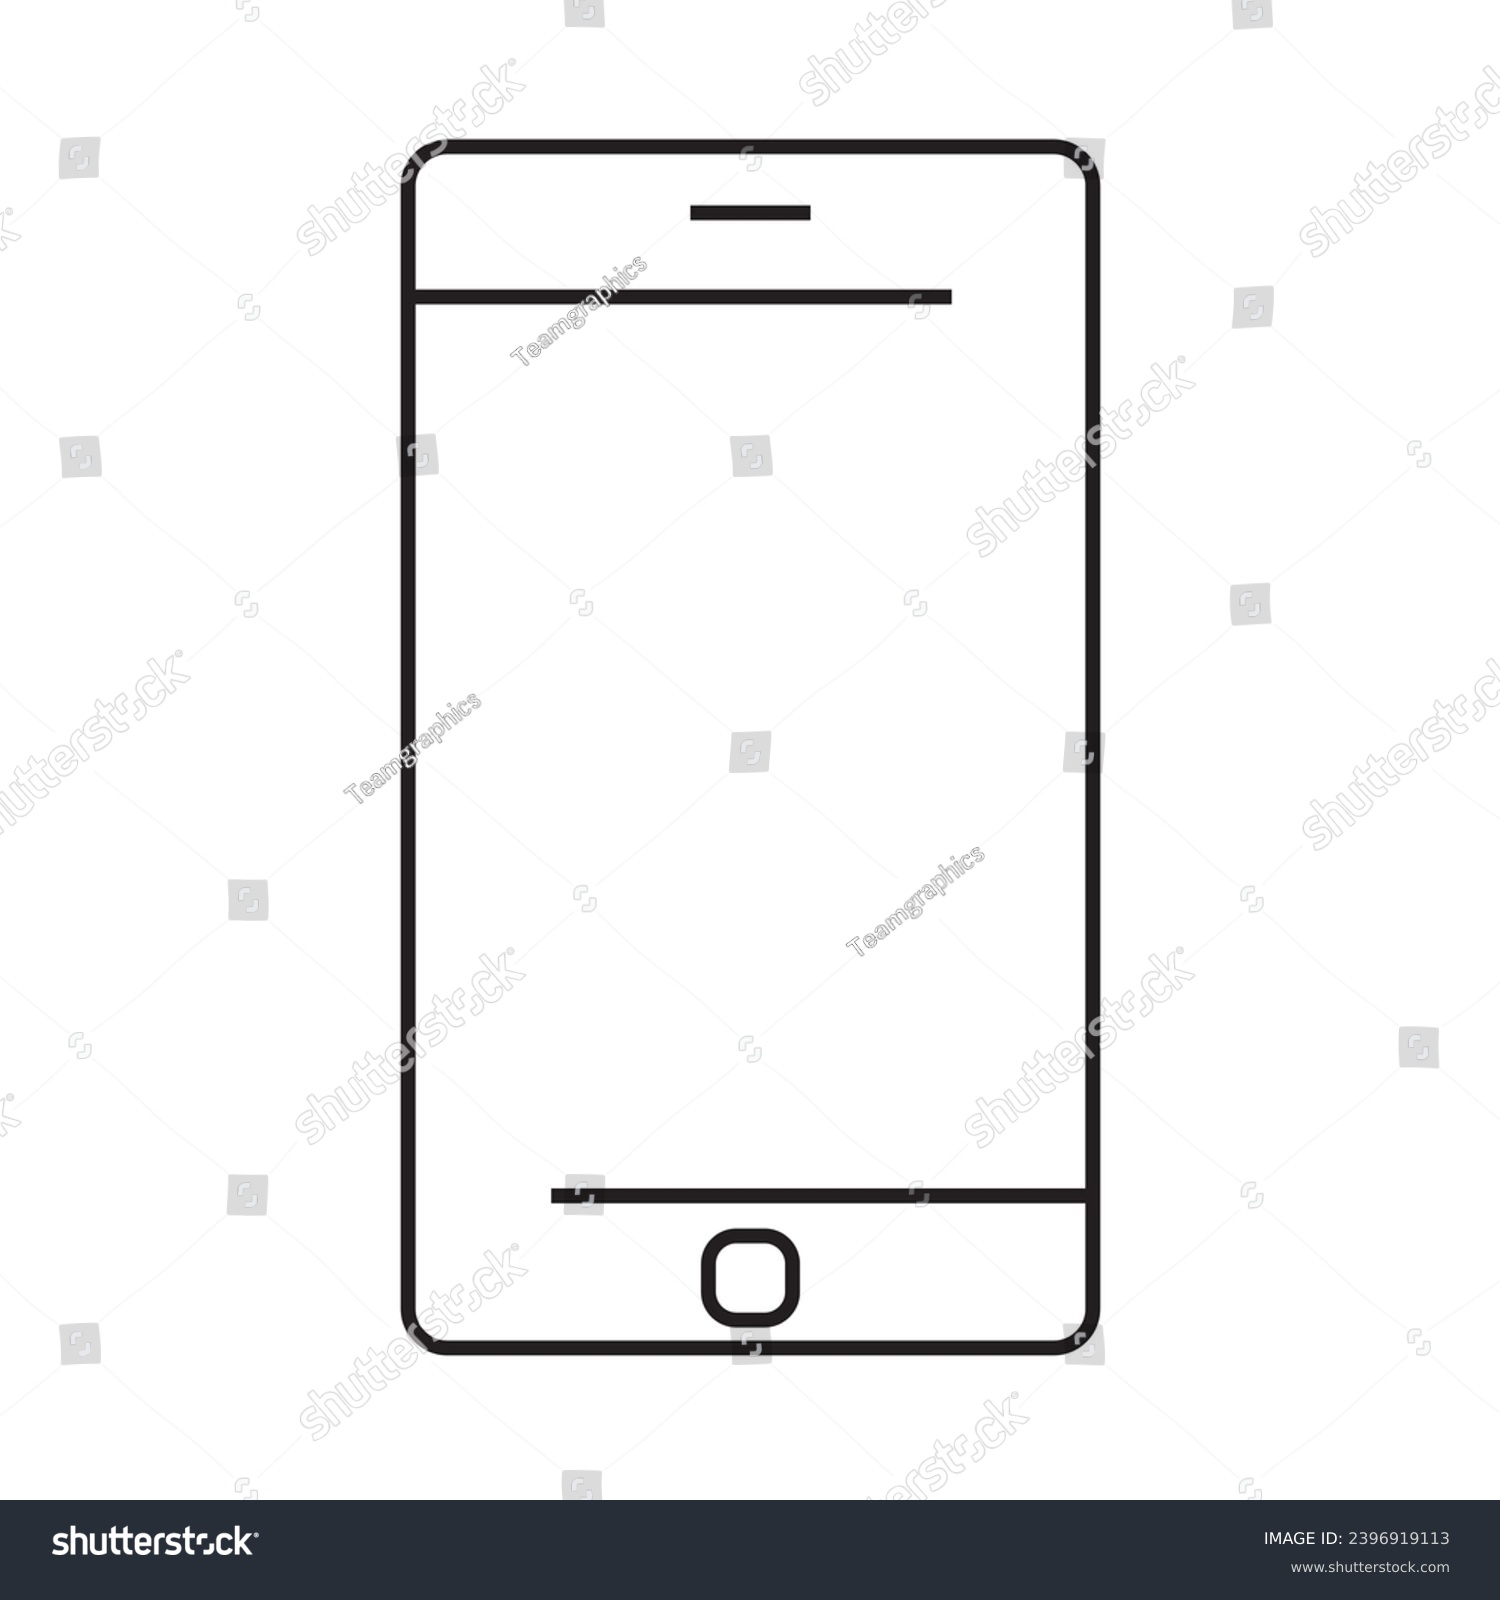 SVG of SHOTLIST banking smart phone icon vector illustration, black and white base color, perfect for icons, mascots, logos, social media post design. app application, call, cell, business, cellphone. svg